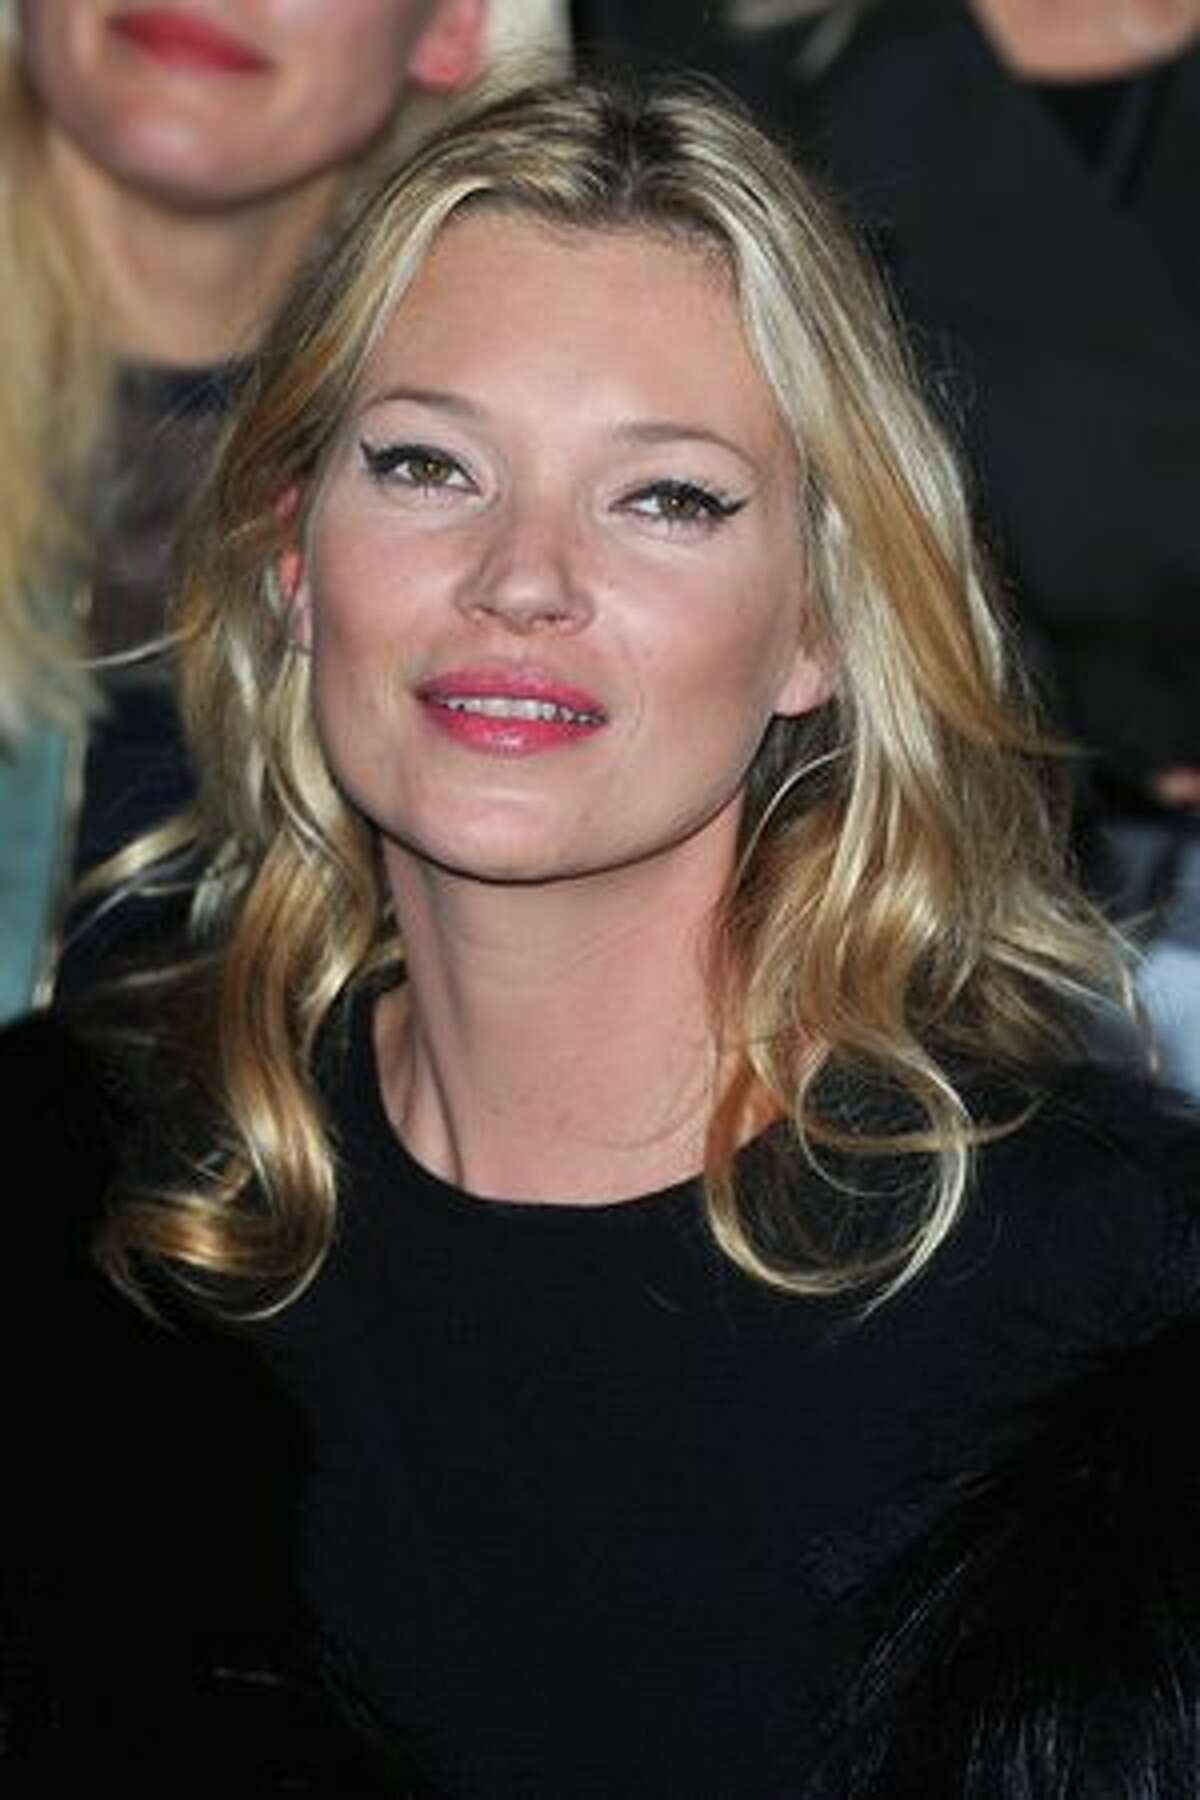 Kate Moss attends the Christian Dior Ready to Wear Spring/Summer 2011 show during Paris Fashion Week in Paris, France.